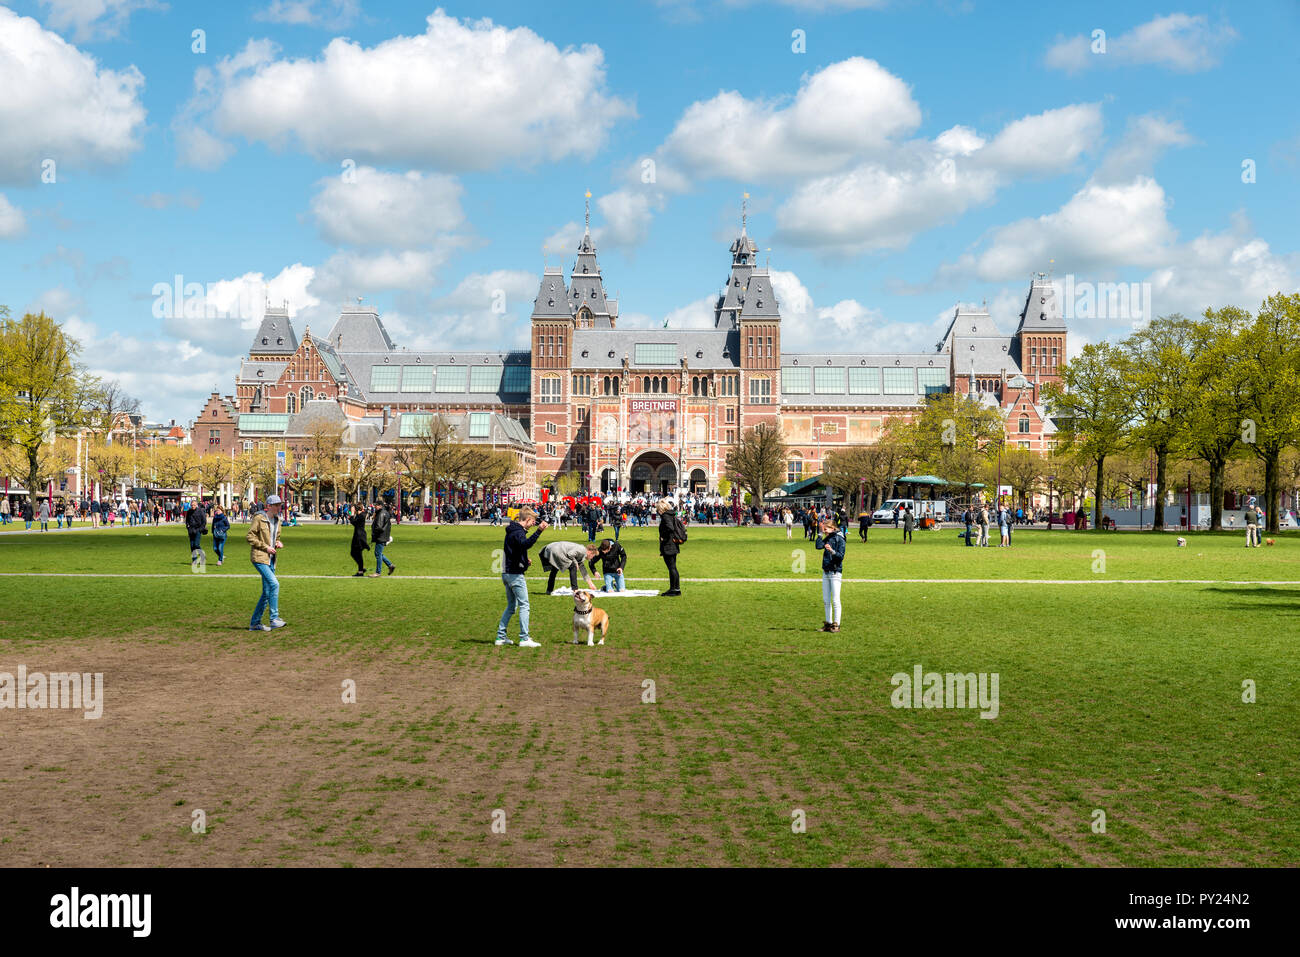 Amsterdam, Netherlands on May 03, 2016 : People chilling in the park on The Museumplein near Rijksmuseum museum area in Amsterdam, Netherlands. Stock Photo